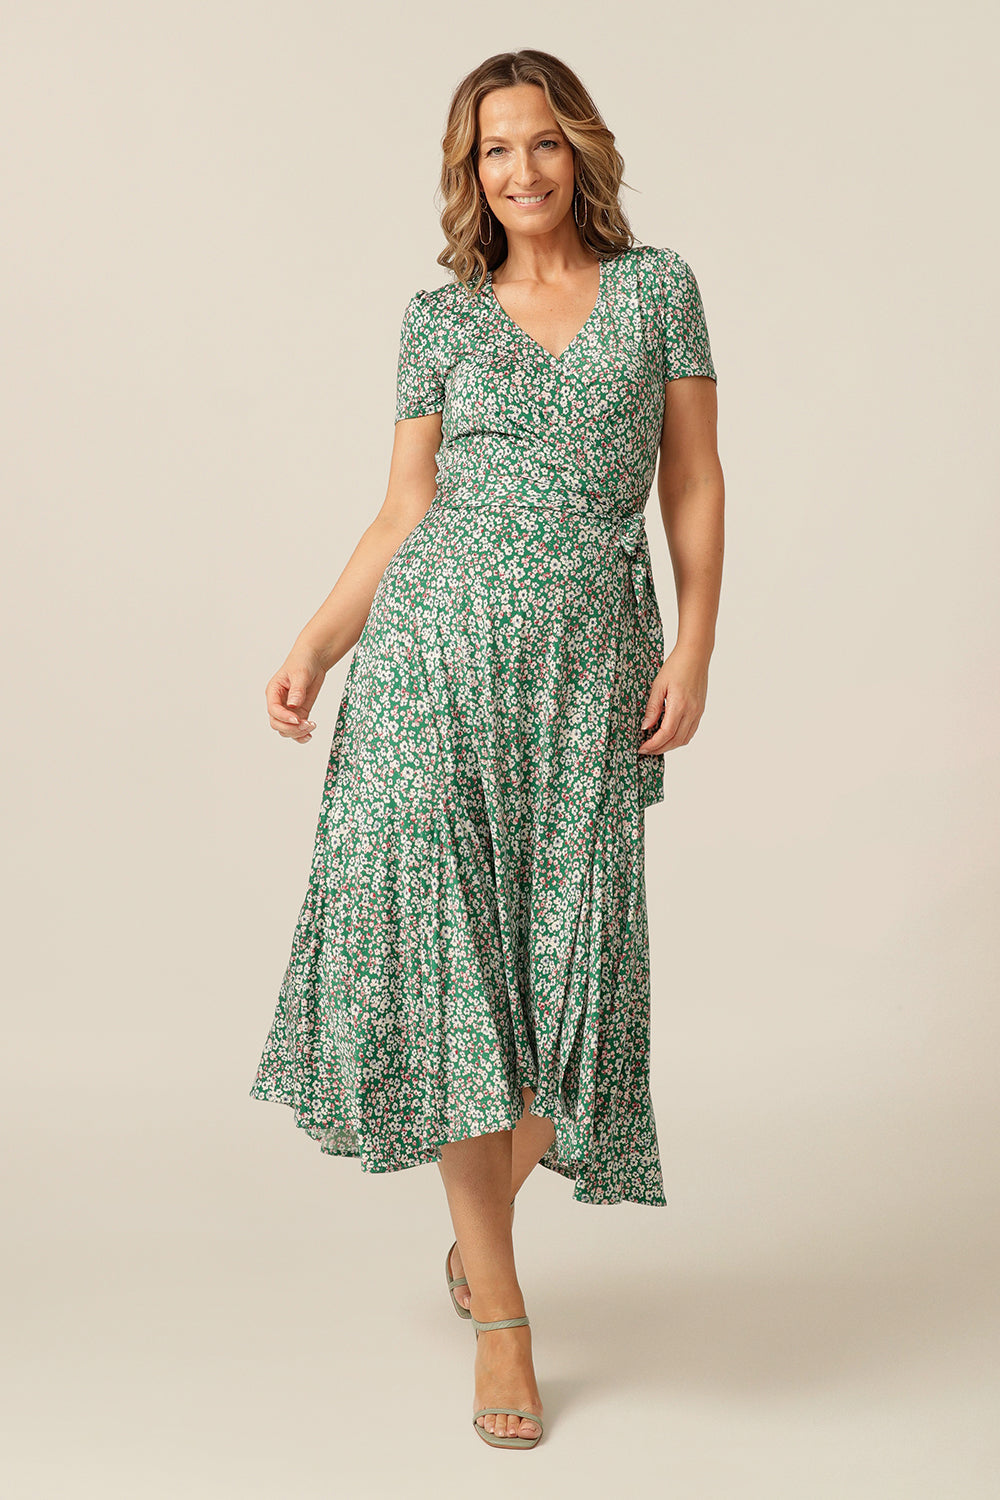 wrap jersey dress with gathered short sleeves and full skirt - best dress for summer occasionwear  and weddings. Made in Australia for petite to plus sizes.